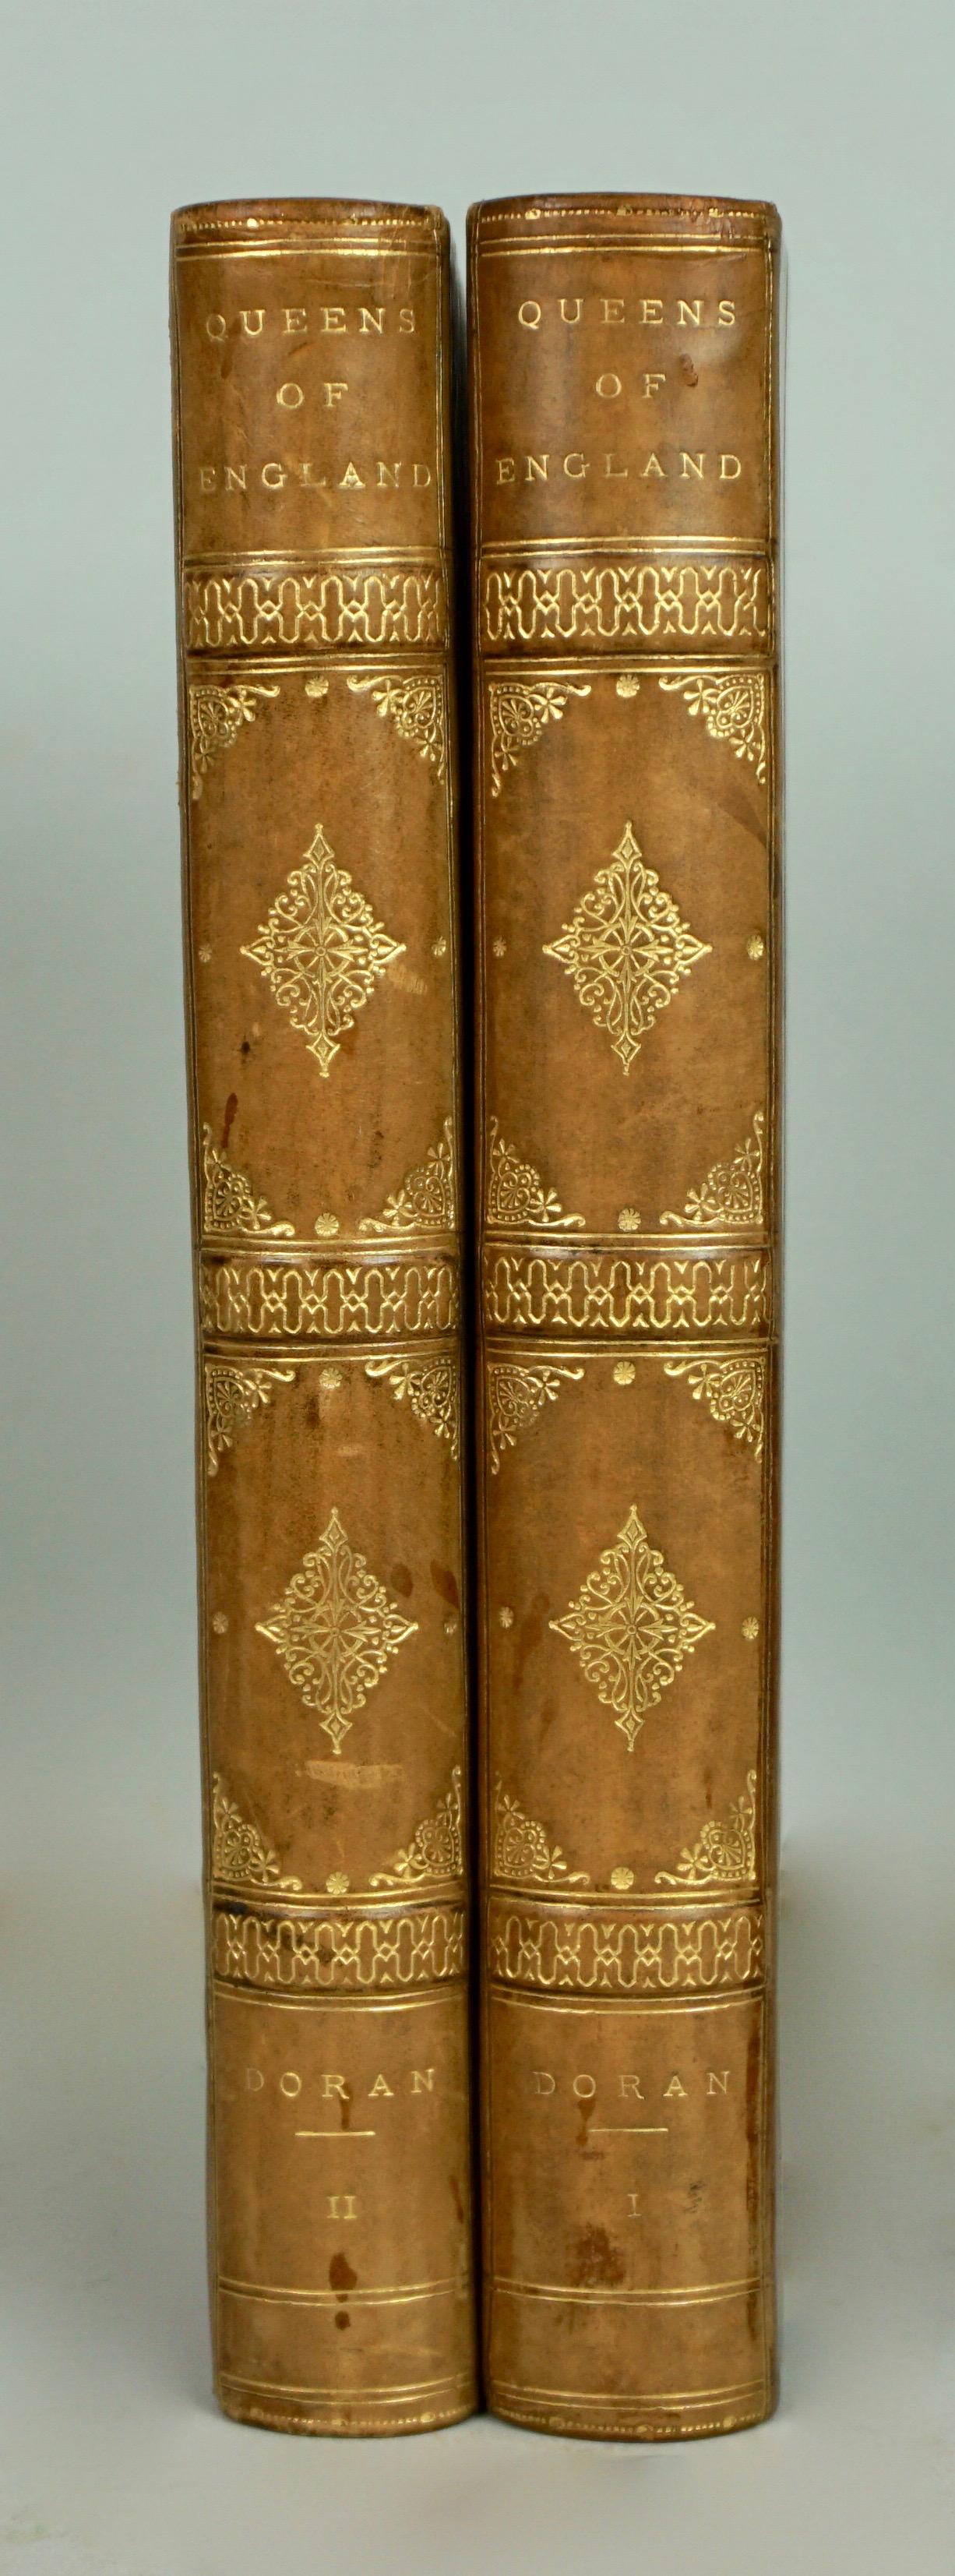 A group of 6 identically bound leather volumes by John Doran: Lives of the Queens of England; Annals of the English Stage; Monarchs Retired from Business. Each title consists of 2 volumes, 3/4 leatherbound with marbleized endpapers and marbled paper